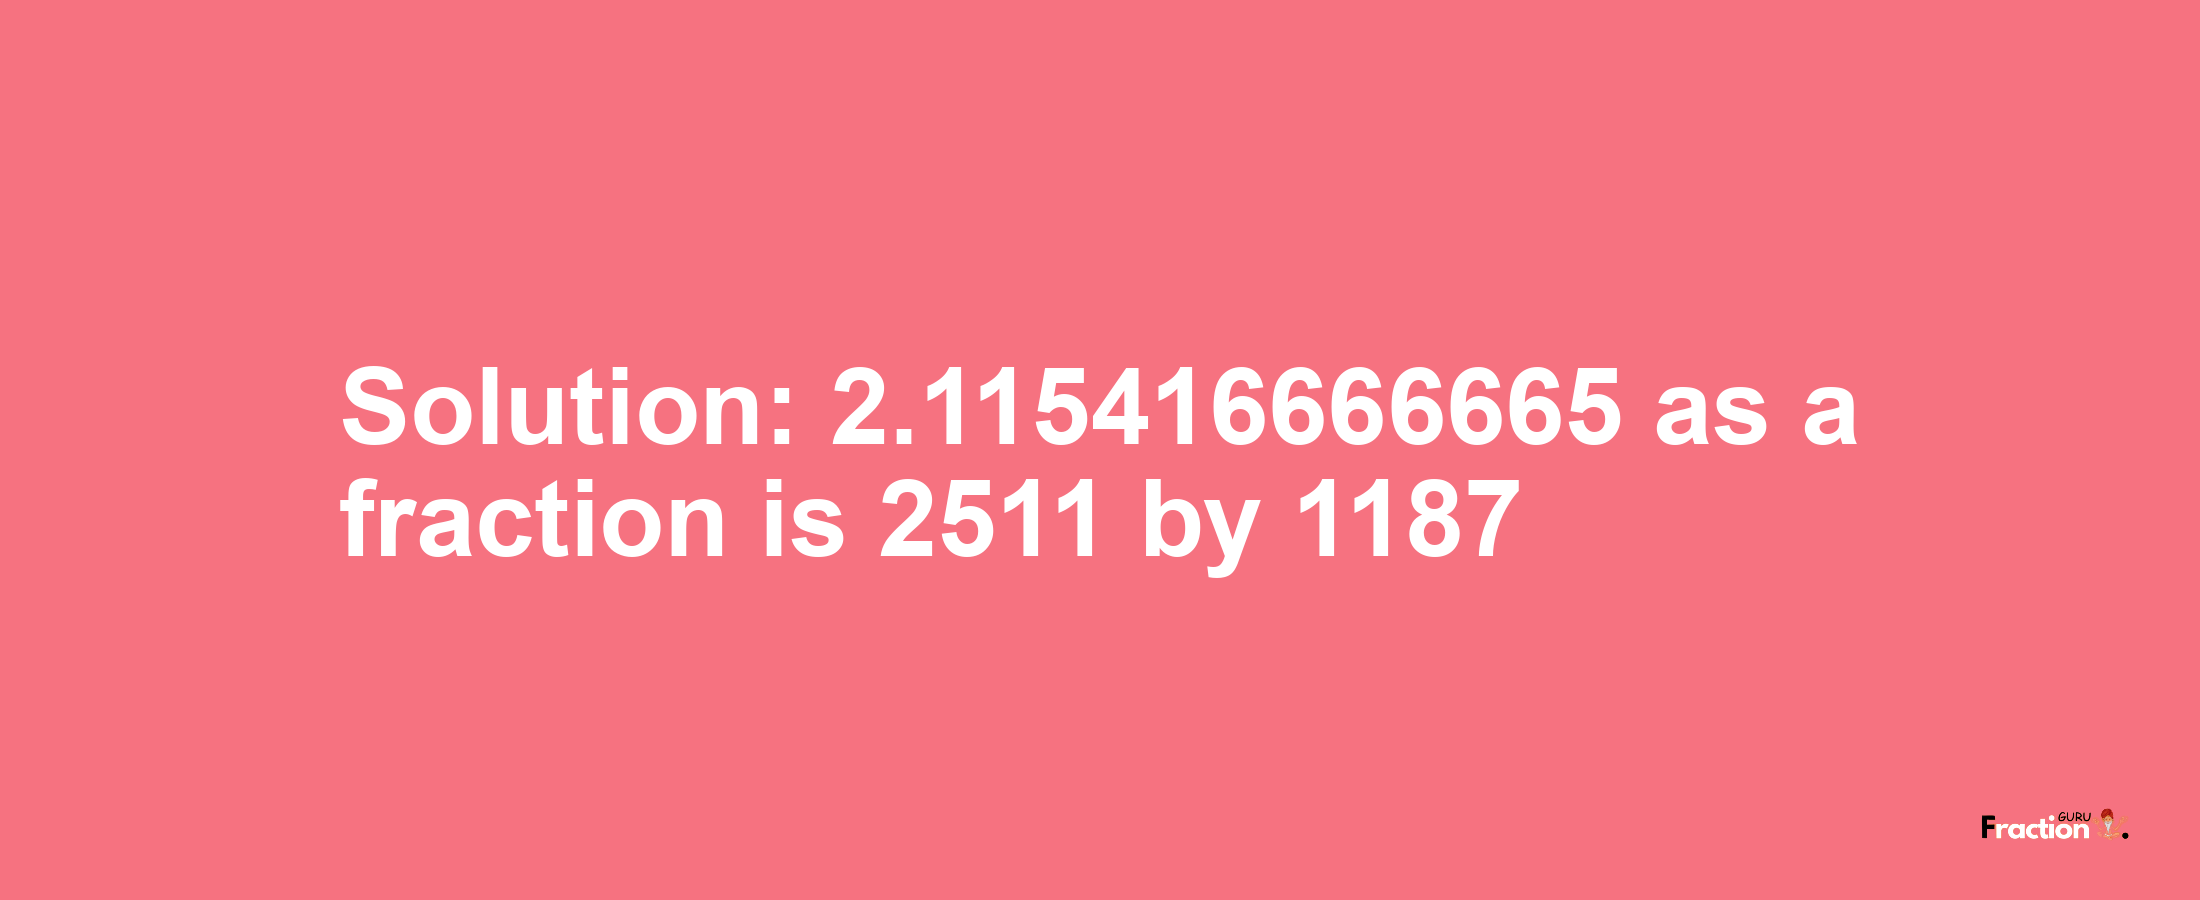 Solution:2.115416666665 as a fraction is 2511/1187